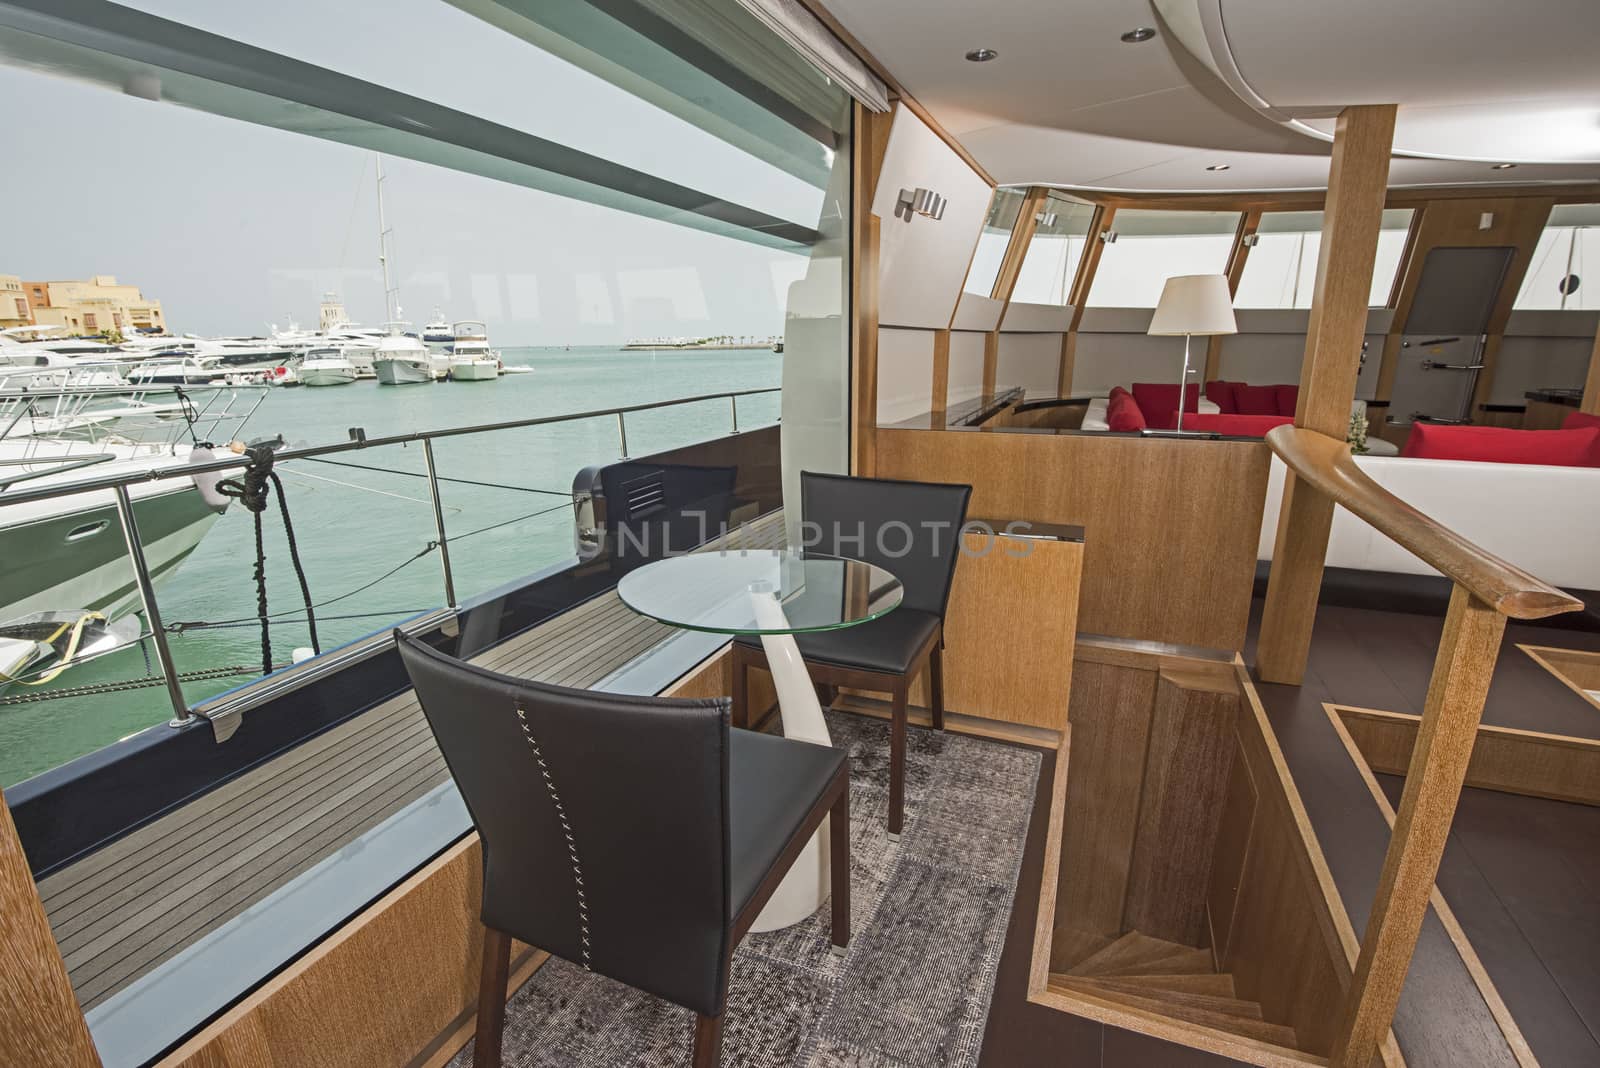 Seating in the salon area of a large luxury motor yacht with big panorama window showing view over tropical ocean marina